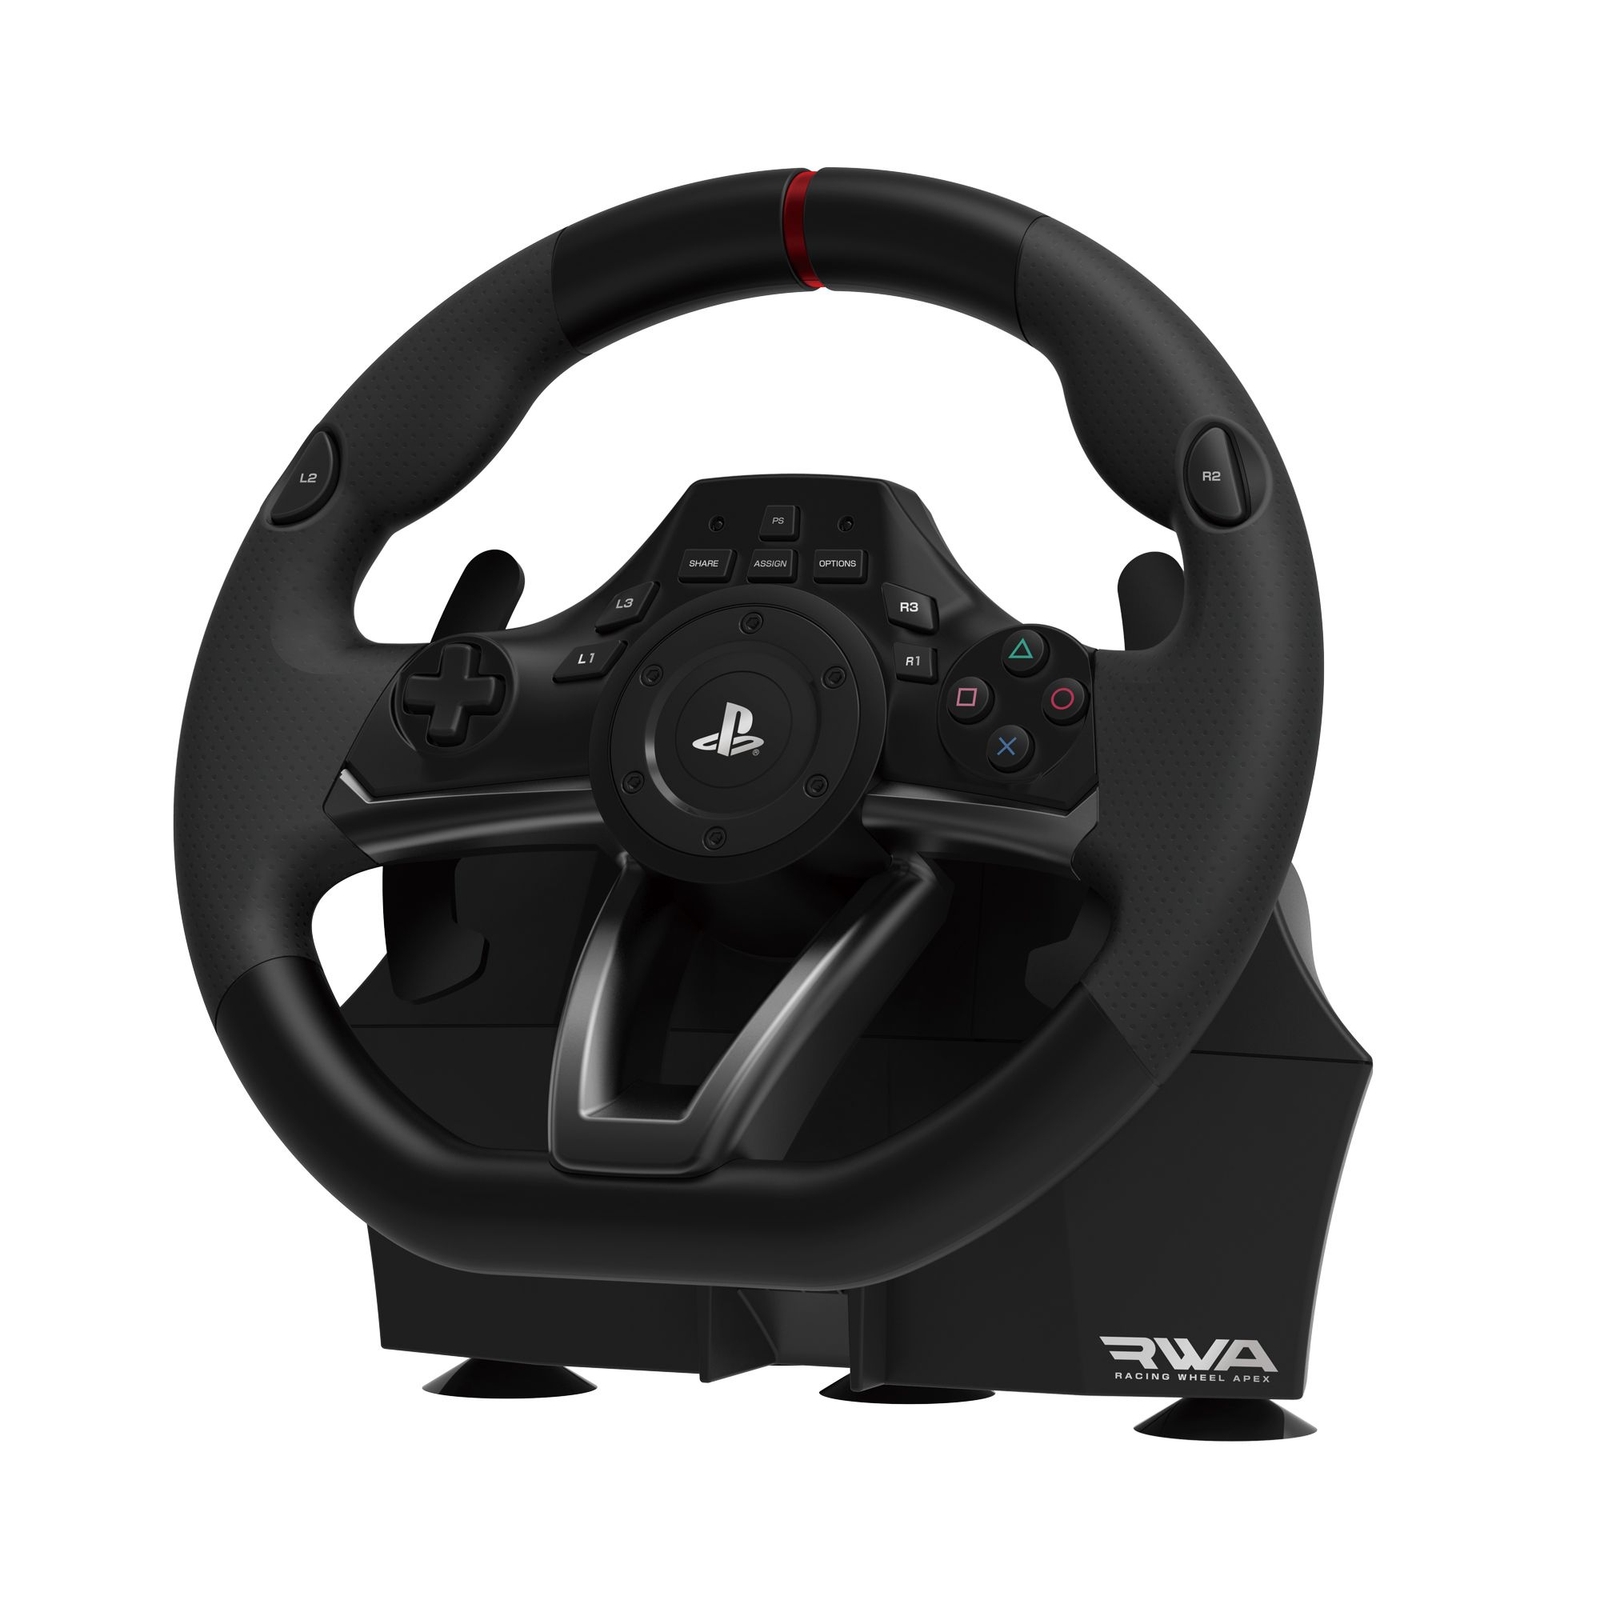 HORI Racing Wheel Apex for Sony PlayStation 4/3, and PC, Black - image 1 of 2